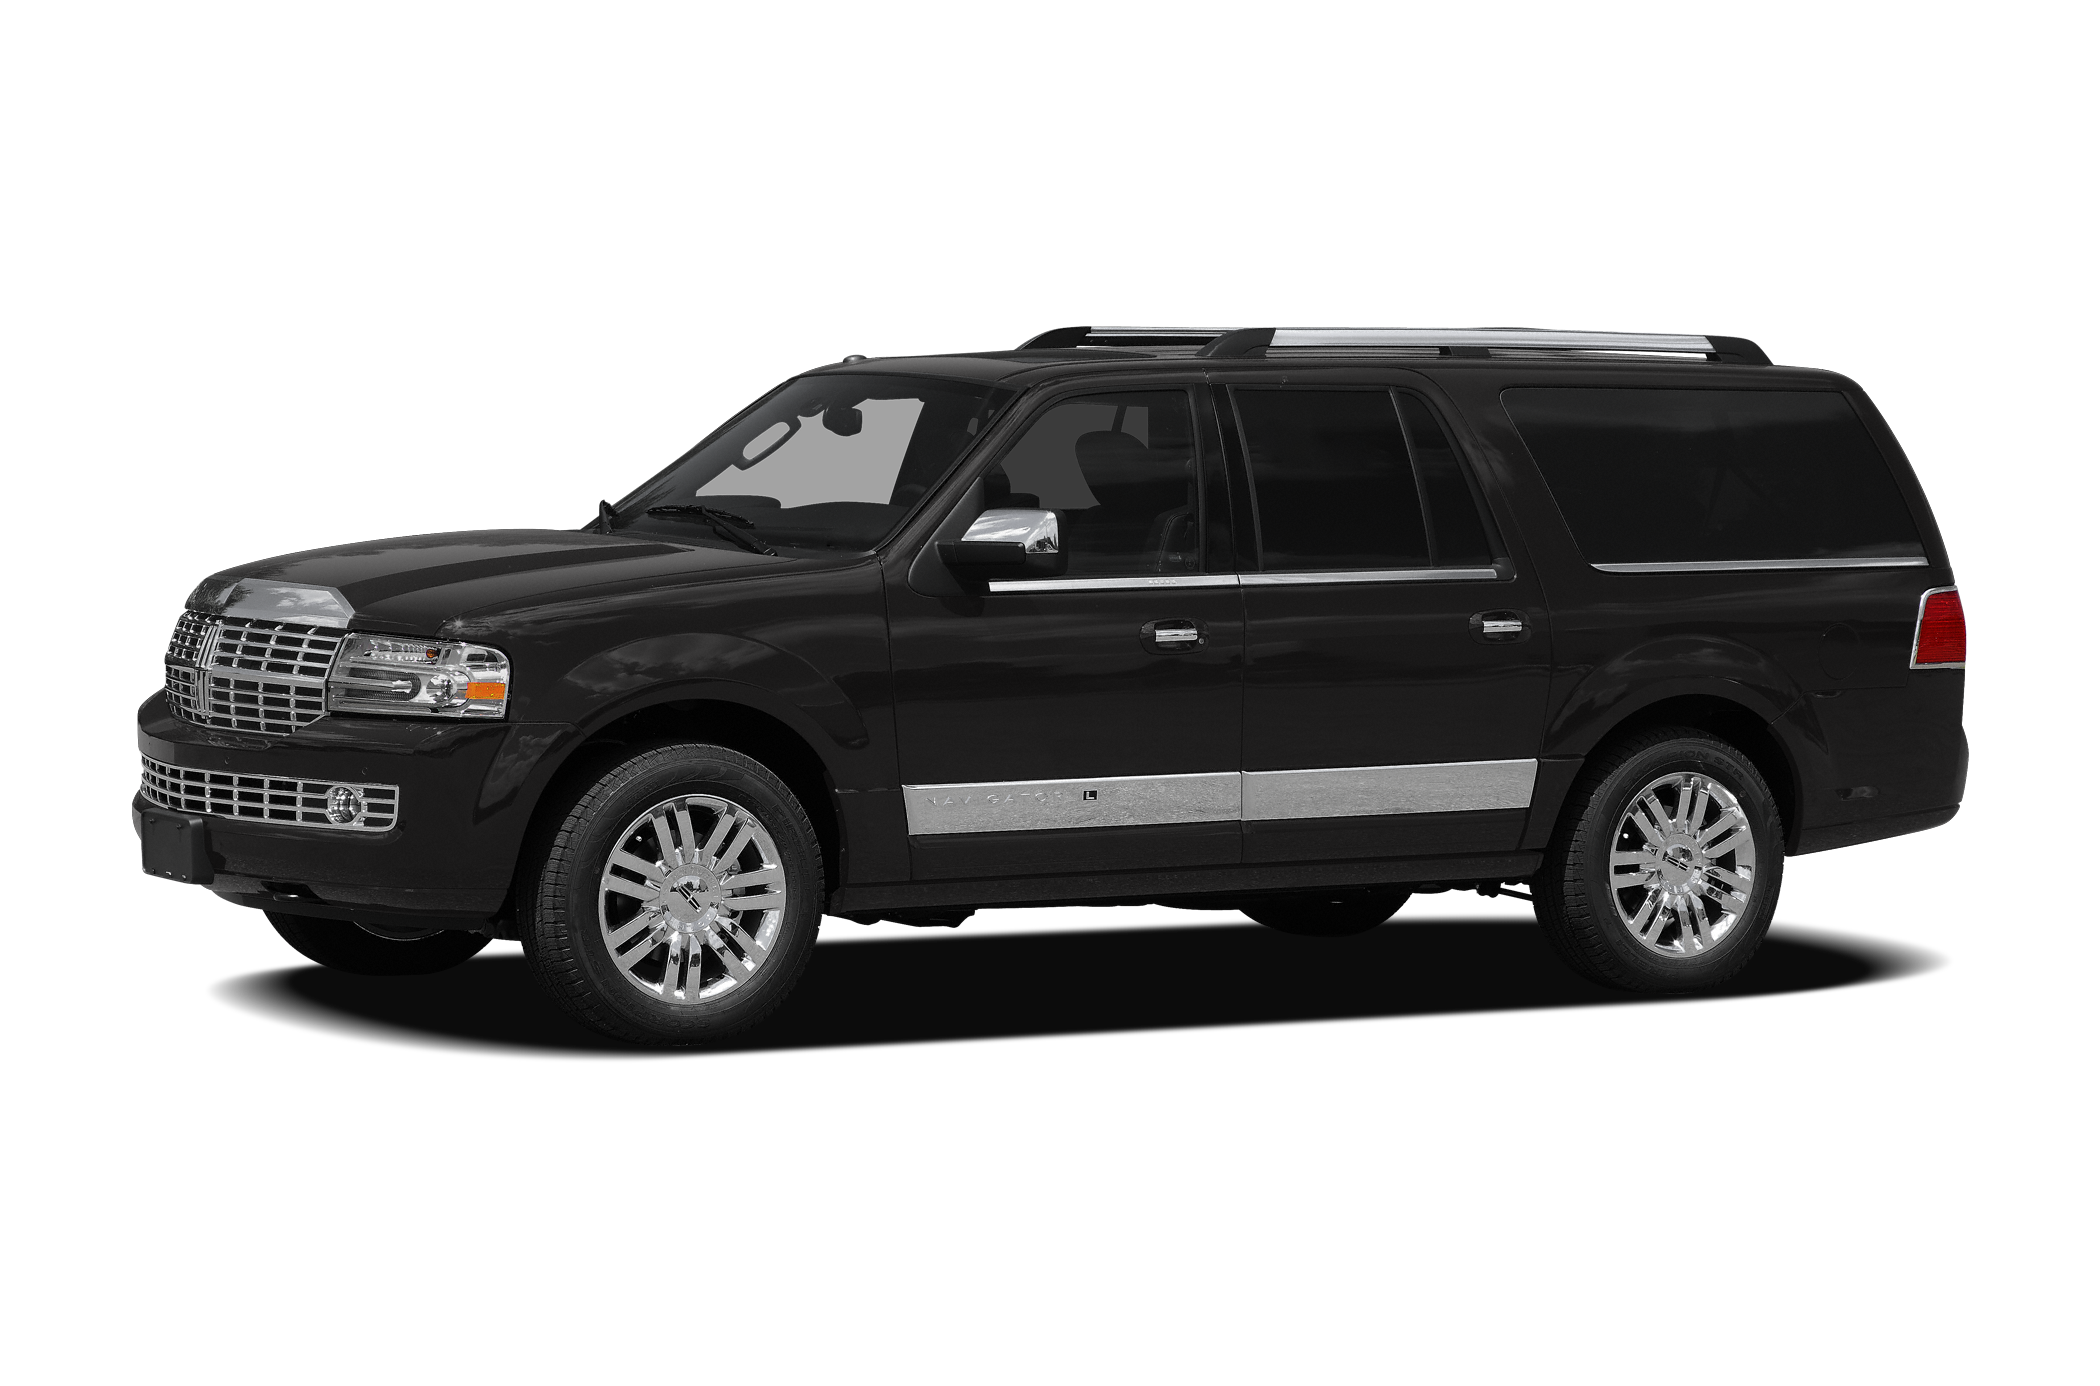 Used 2012 Lincoln Navigator for Sale Near Me | Cars.com